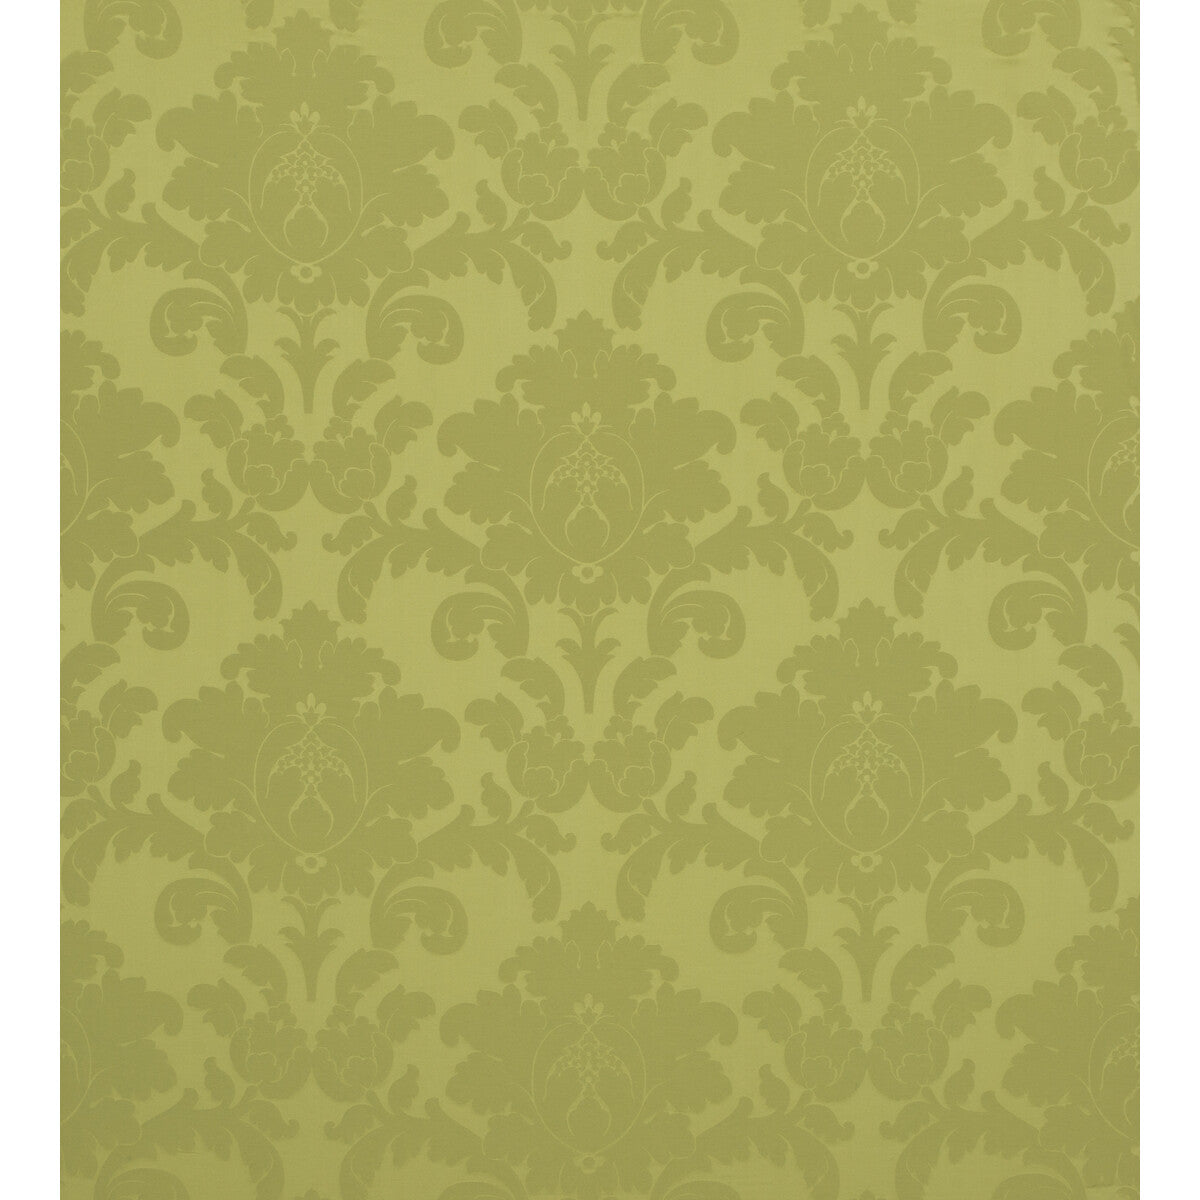 Sylvana fabric in peridot color - pattern 8014117.3.0 - by Brunschwig &amp; Fils in the Maisonnette collection